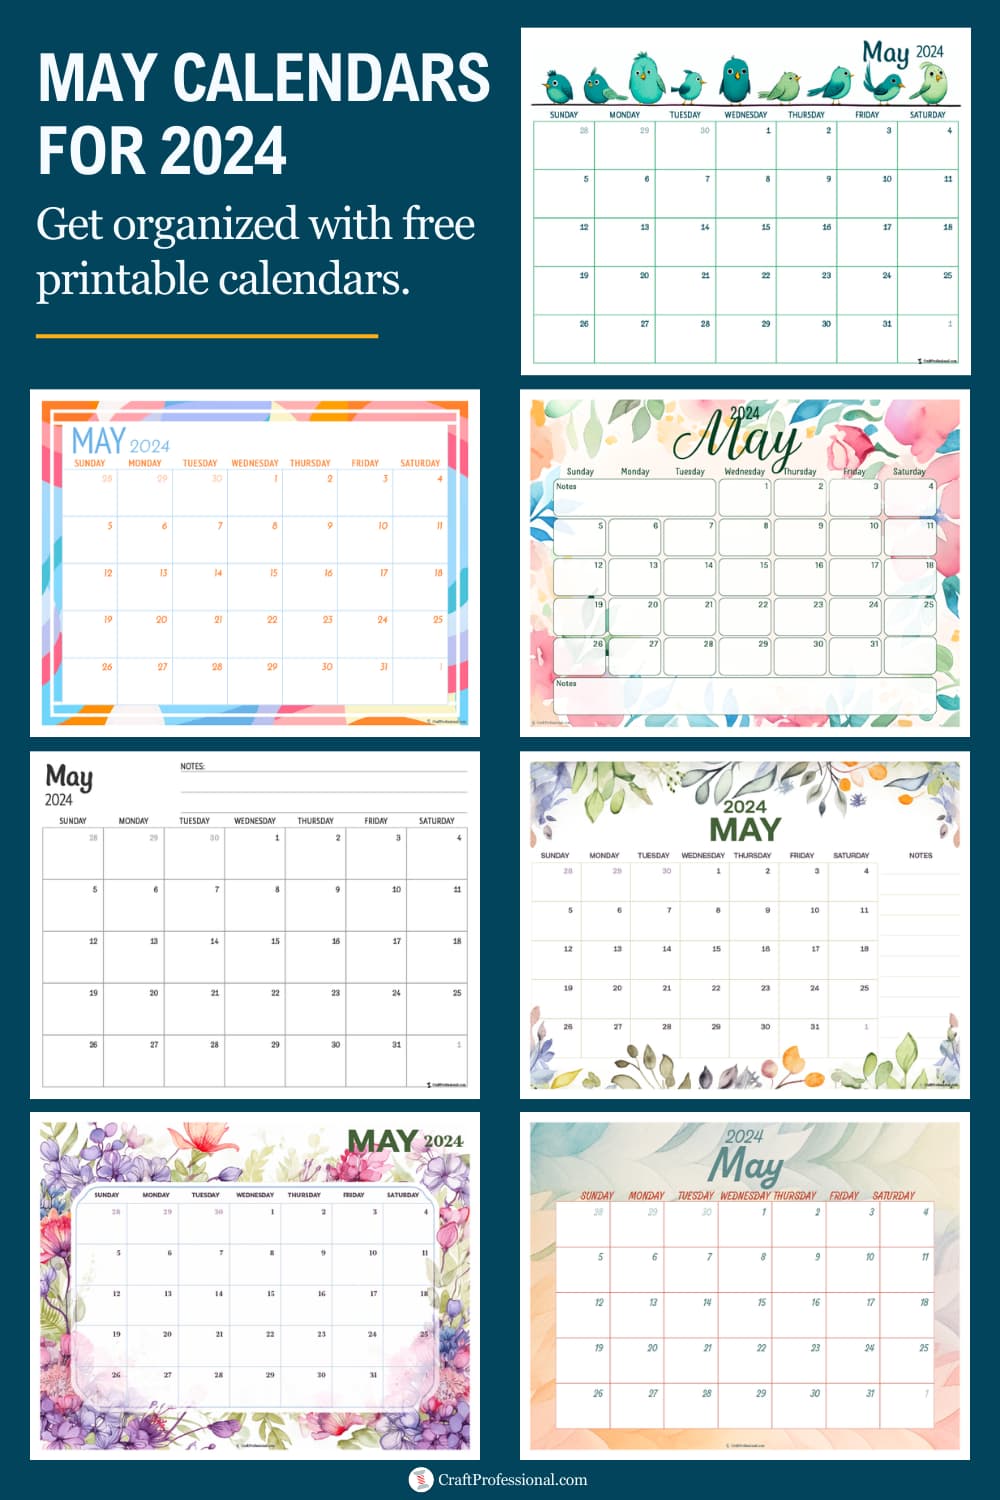 Collage of printable calendars. Text - May calendars for 2024. Get organized with free printable calendars.